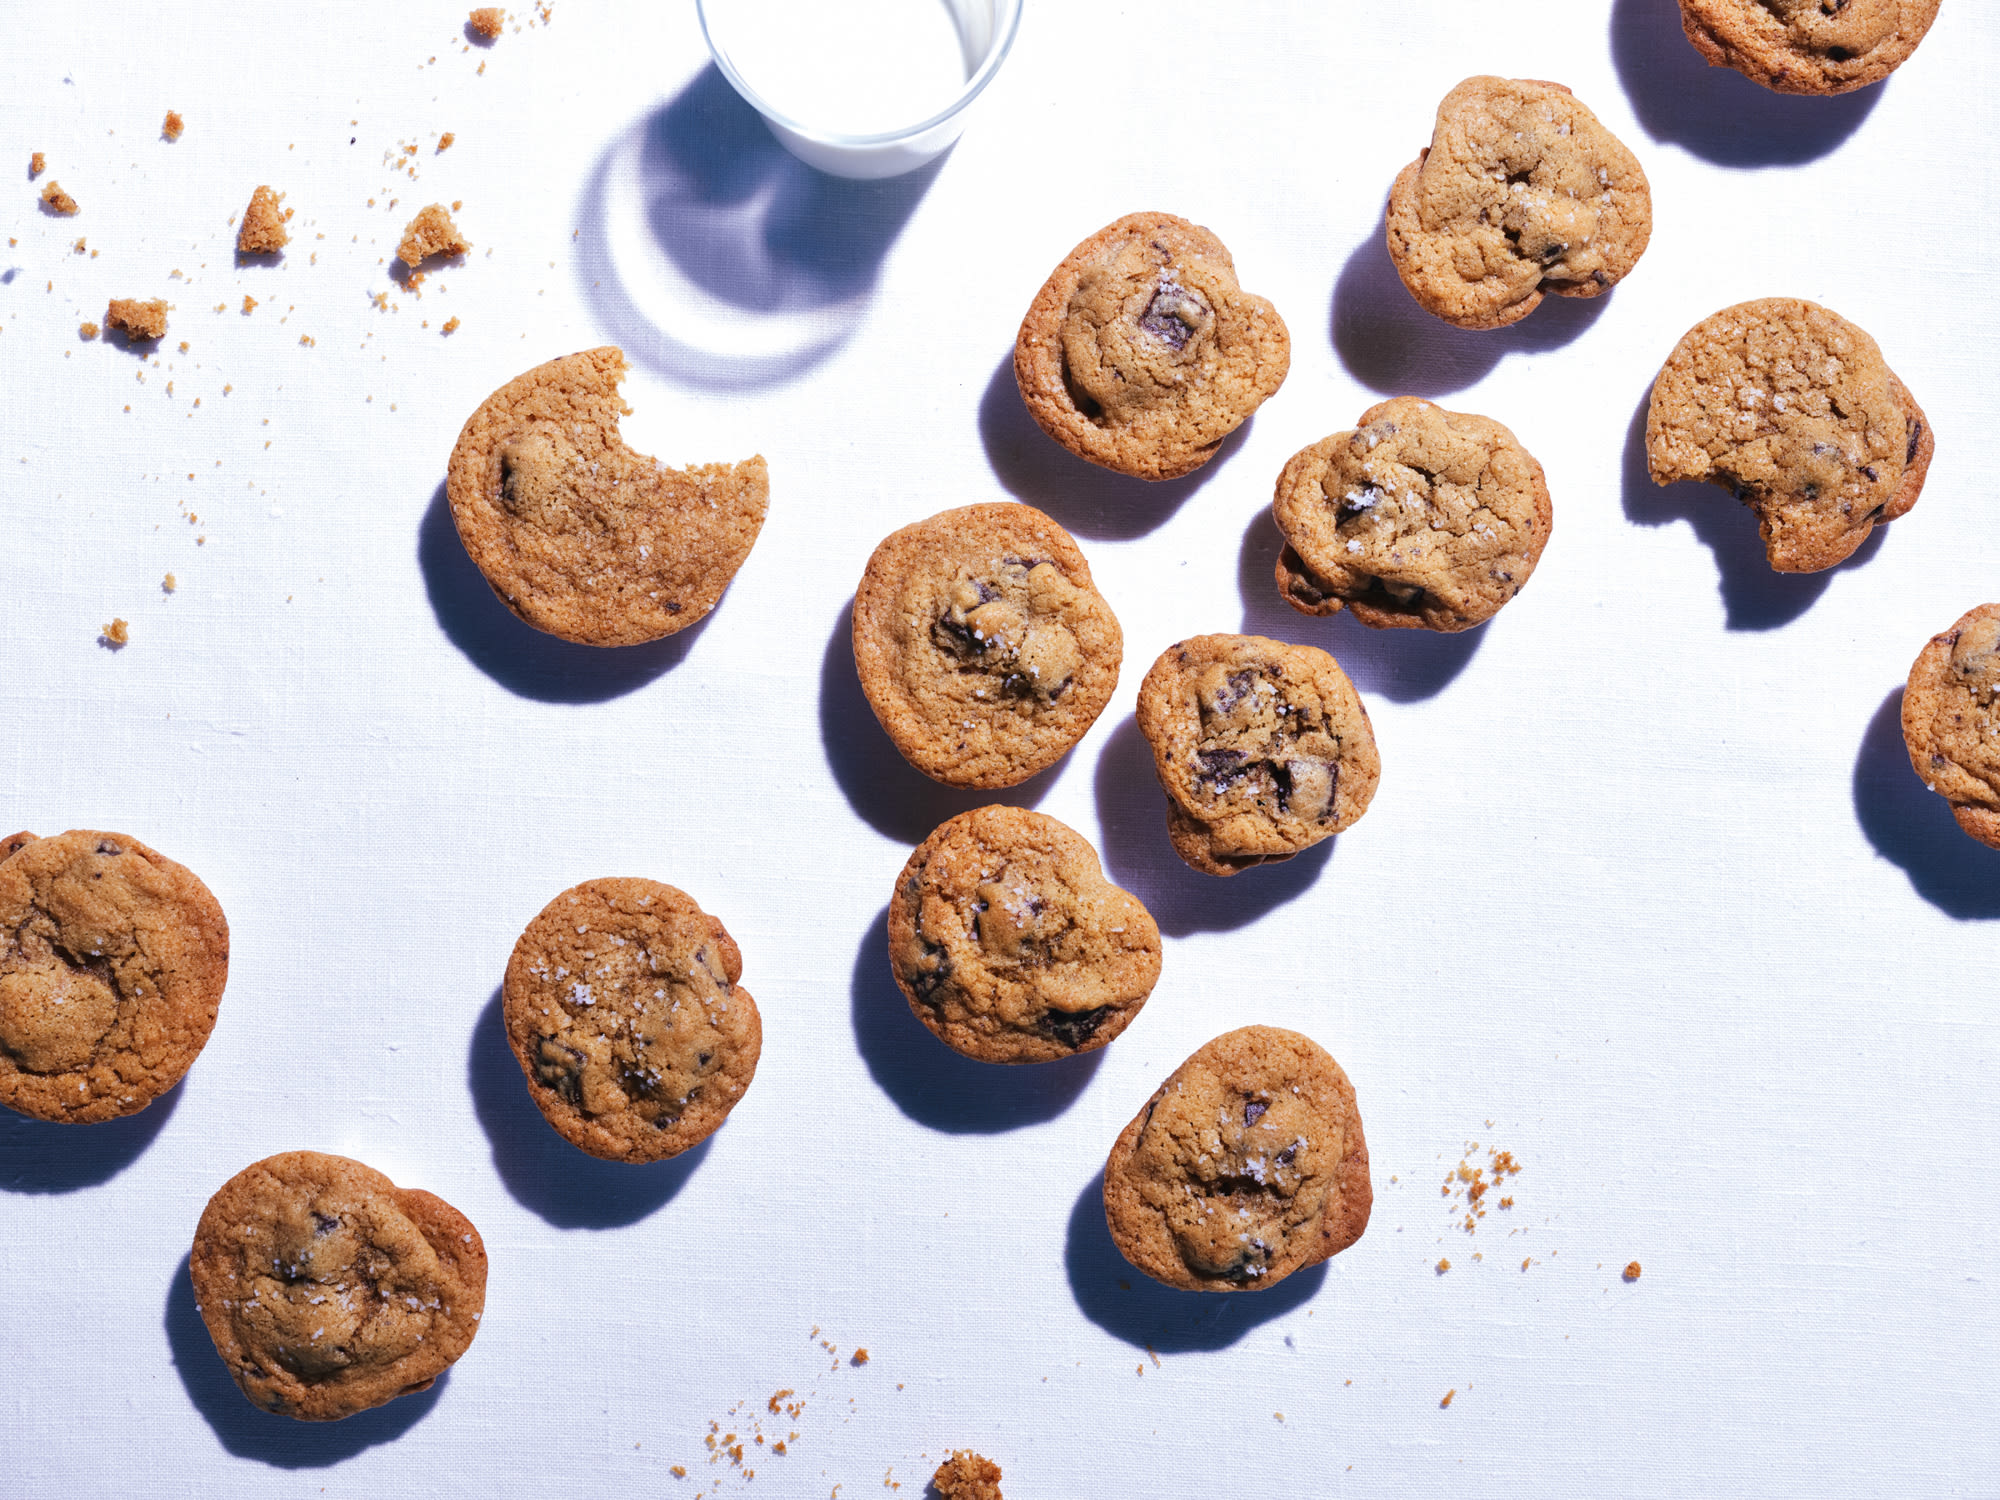 9 of our favorite cookie recipes for baking right now